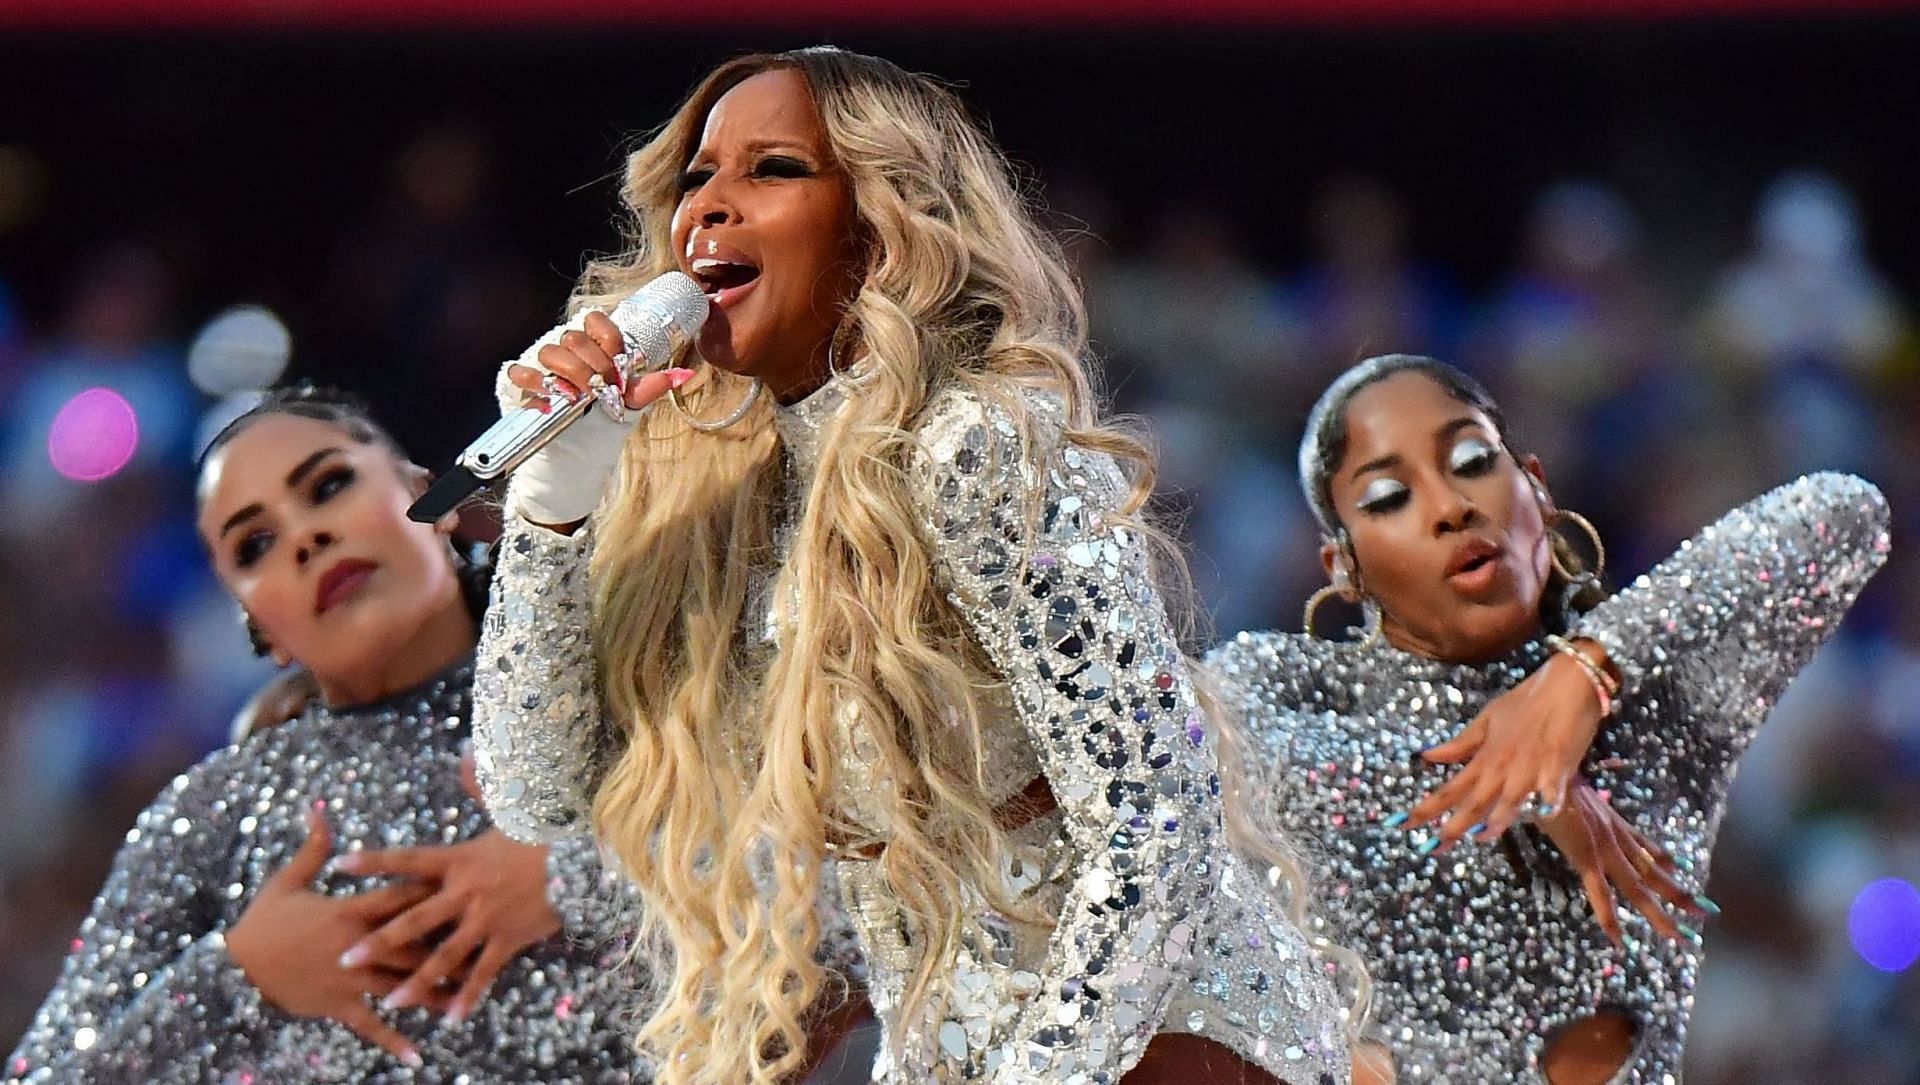 Mary J. Blige Says She's Excited to Be Sole Female Halftime Performer